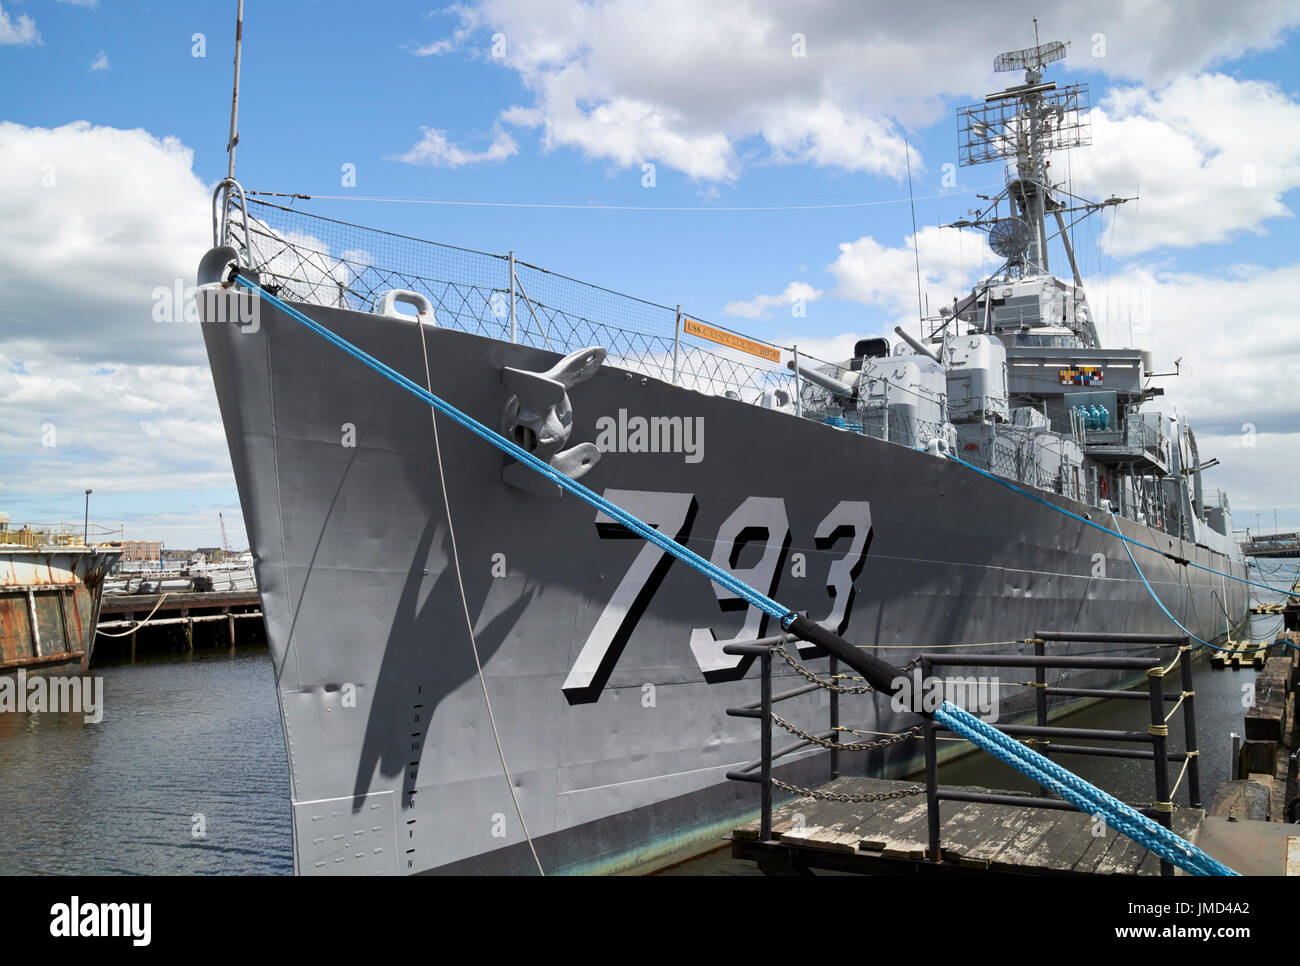 Uss cassin young à Charlestown Navy Yard Boston USA Banque D'Images